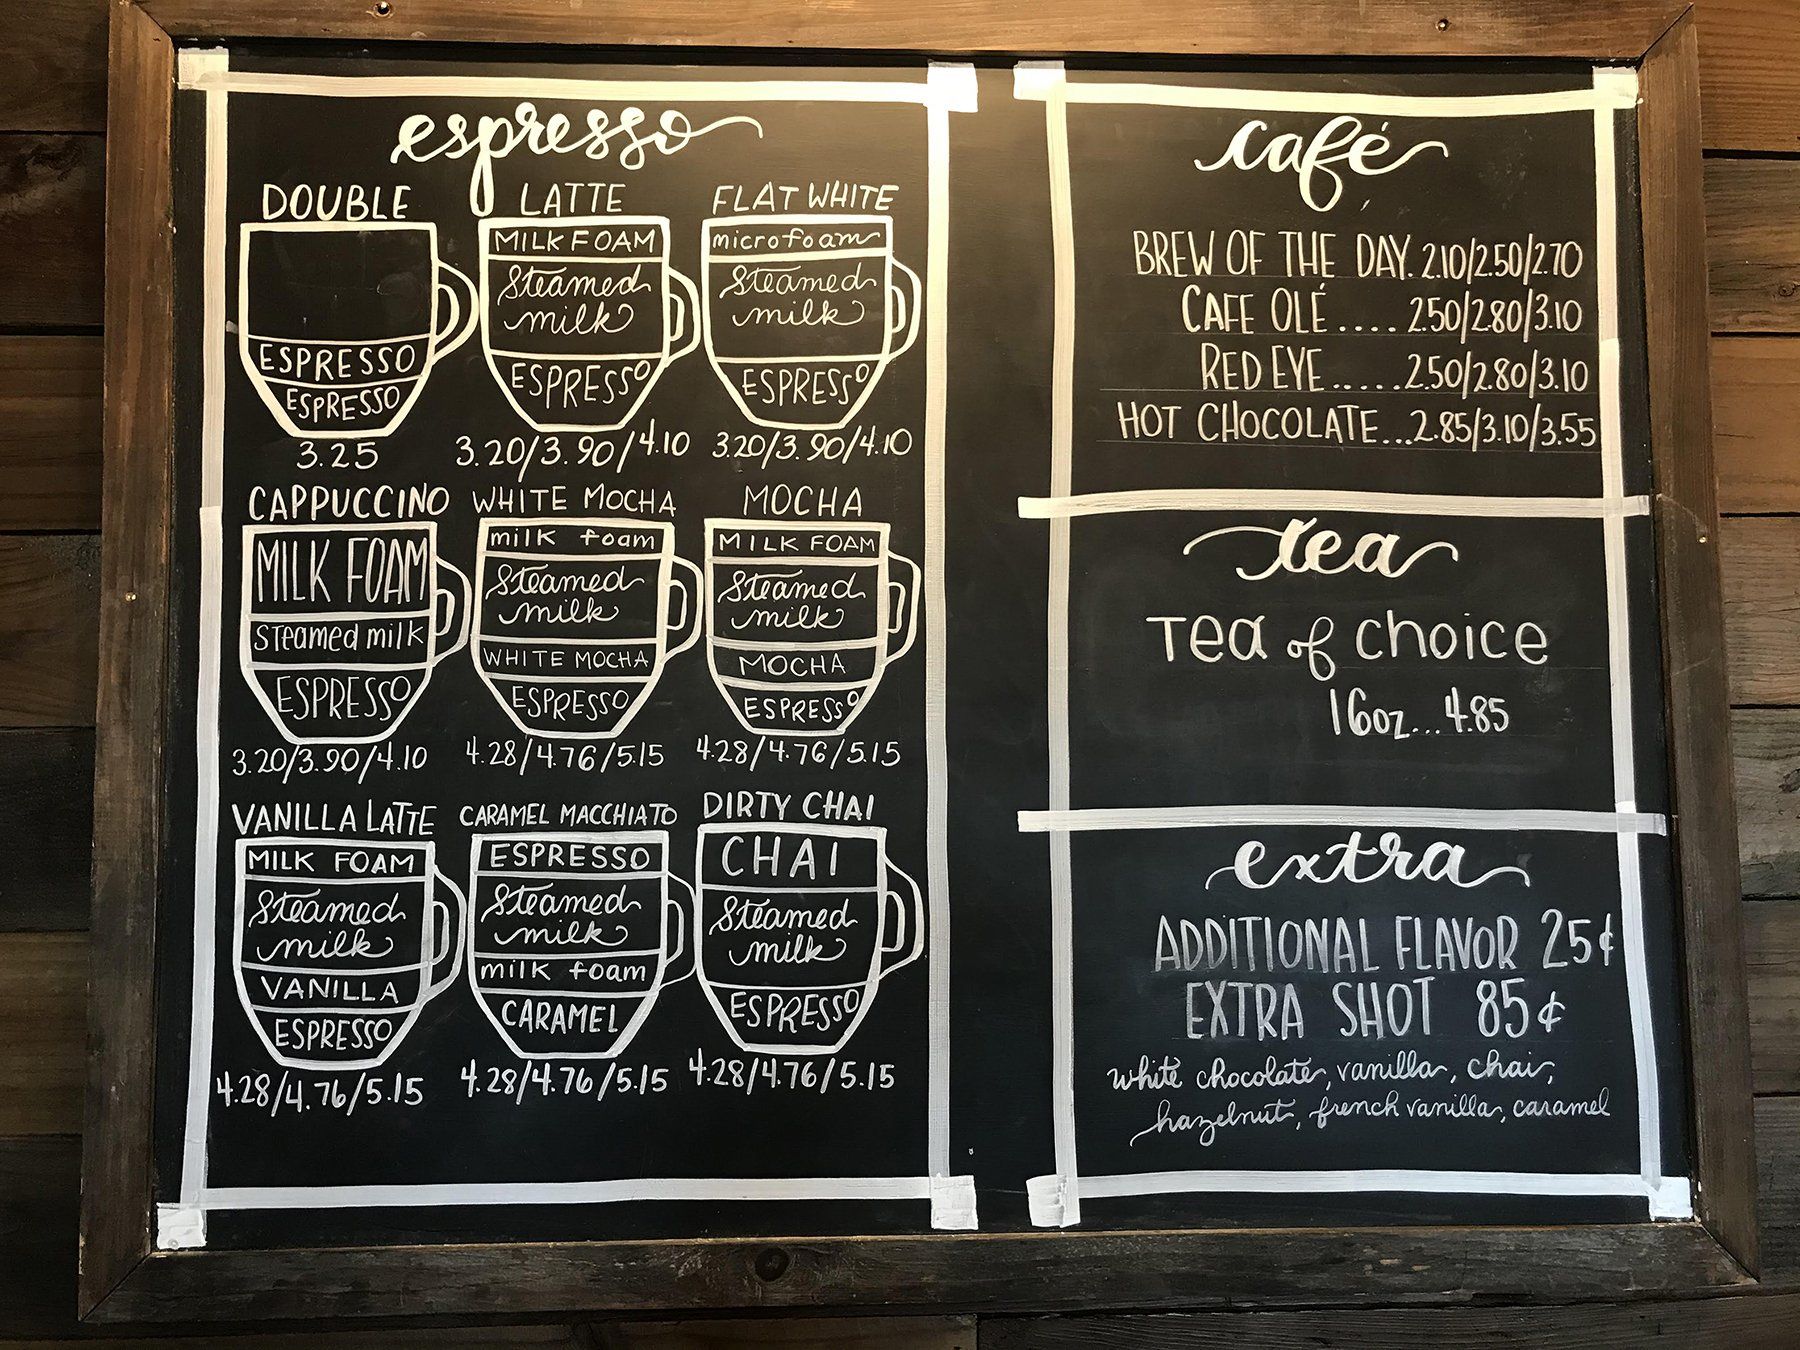 A chalkboard shows different types of coffee and tea